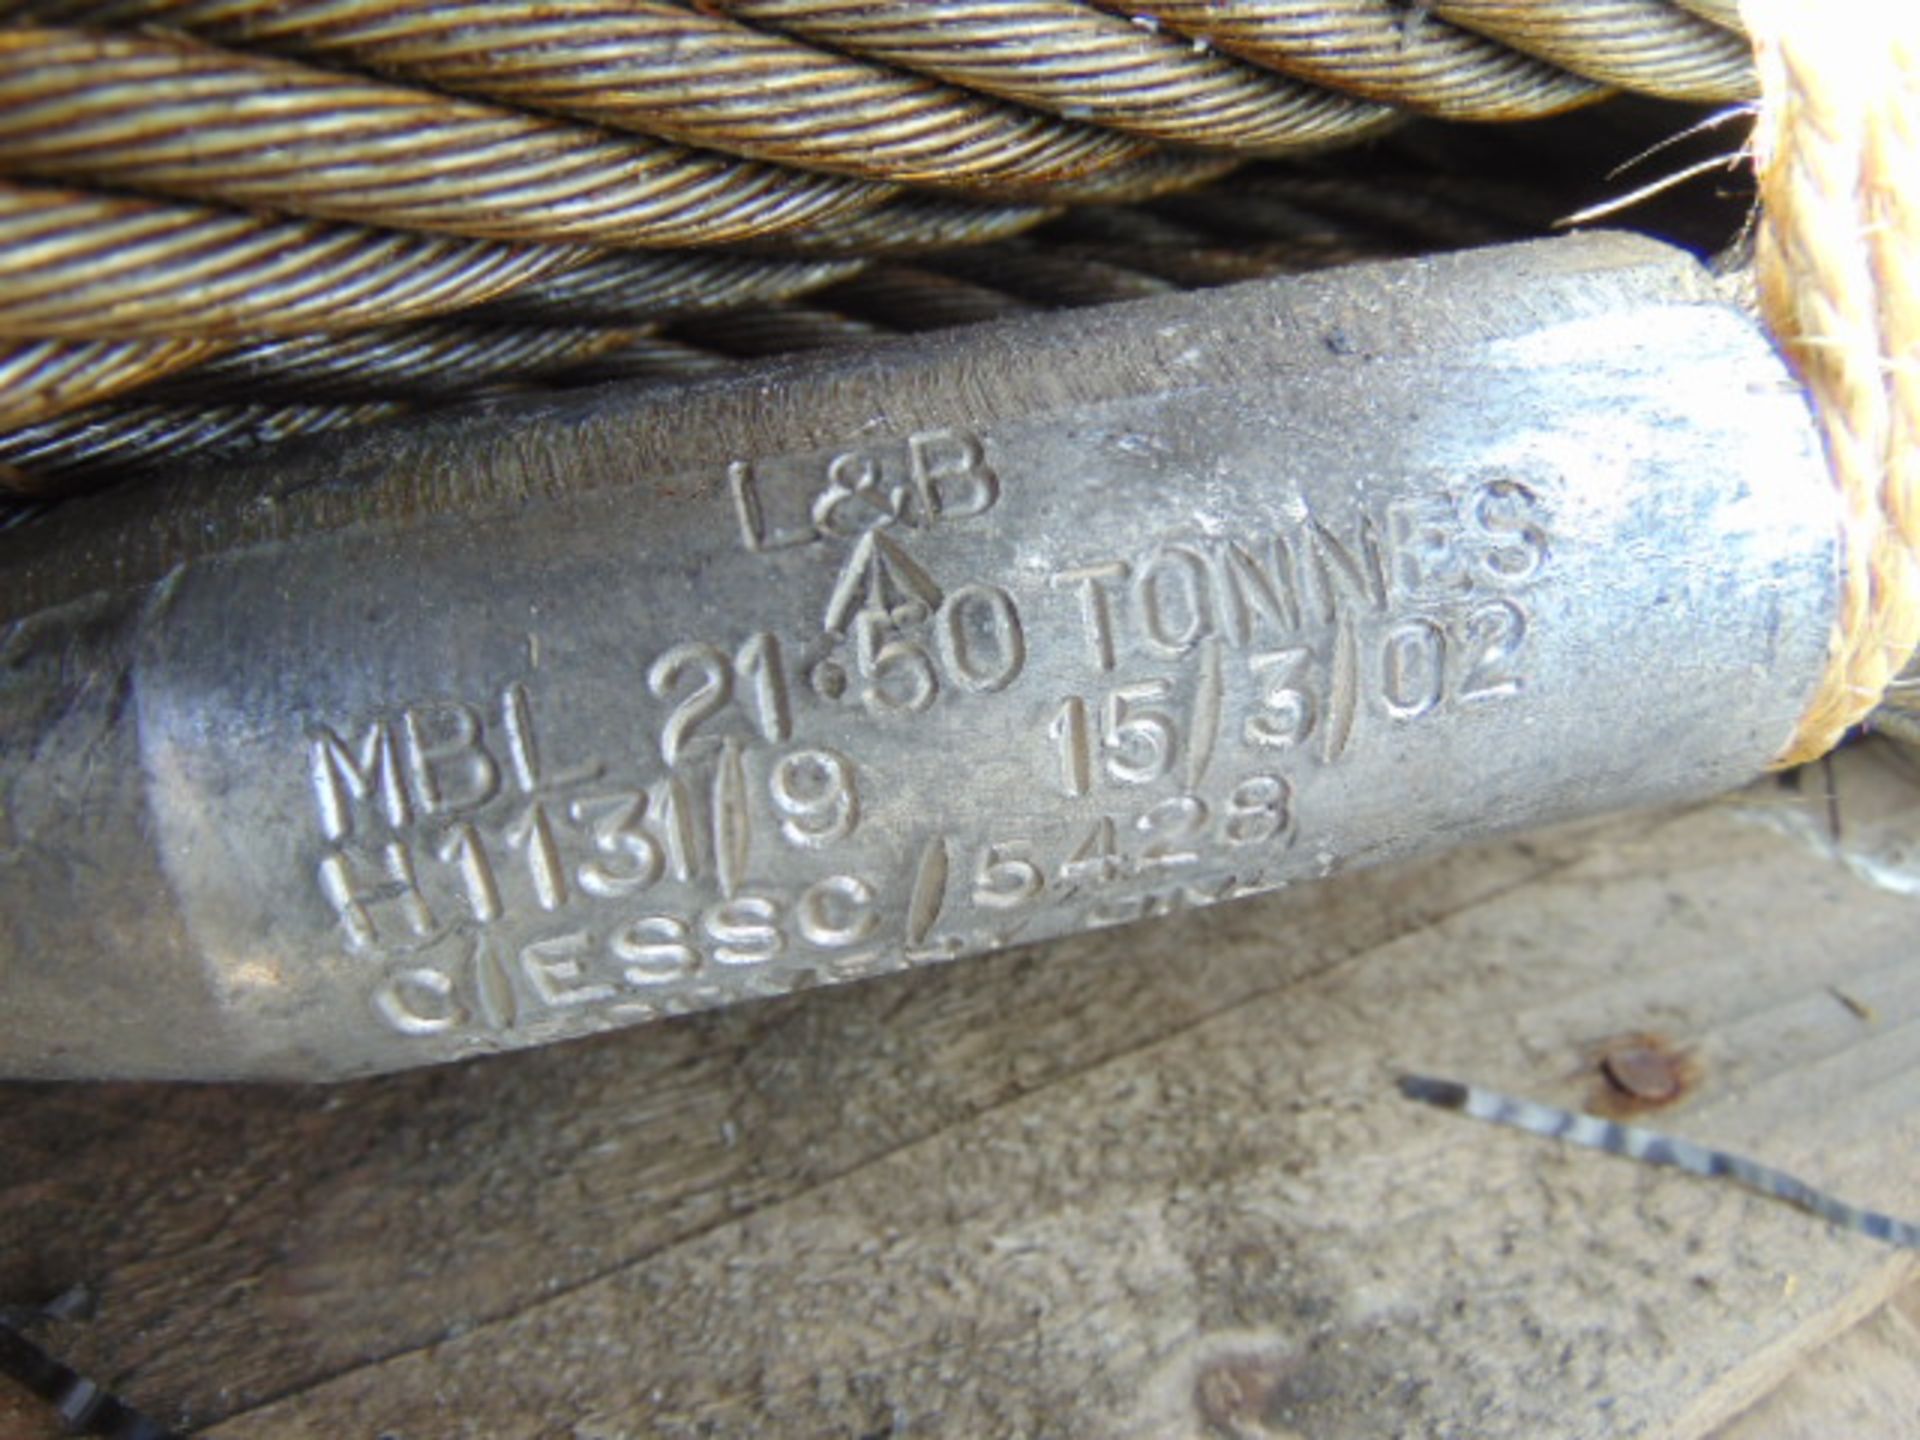 Heavy Duty Hall Bros Roll of 60m 19mm 21.5 tonne Crane/Winch Wire Rope - Image 3 of 5